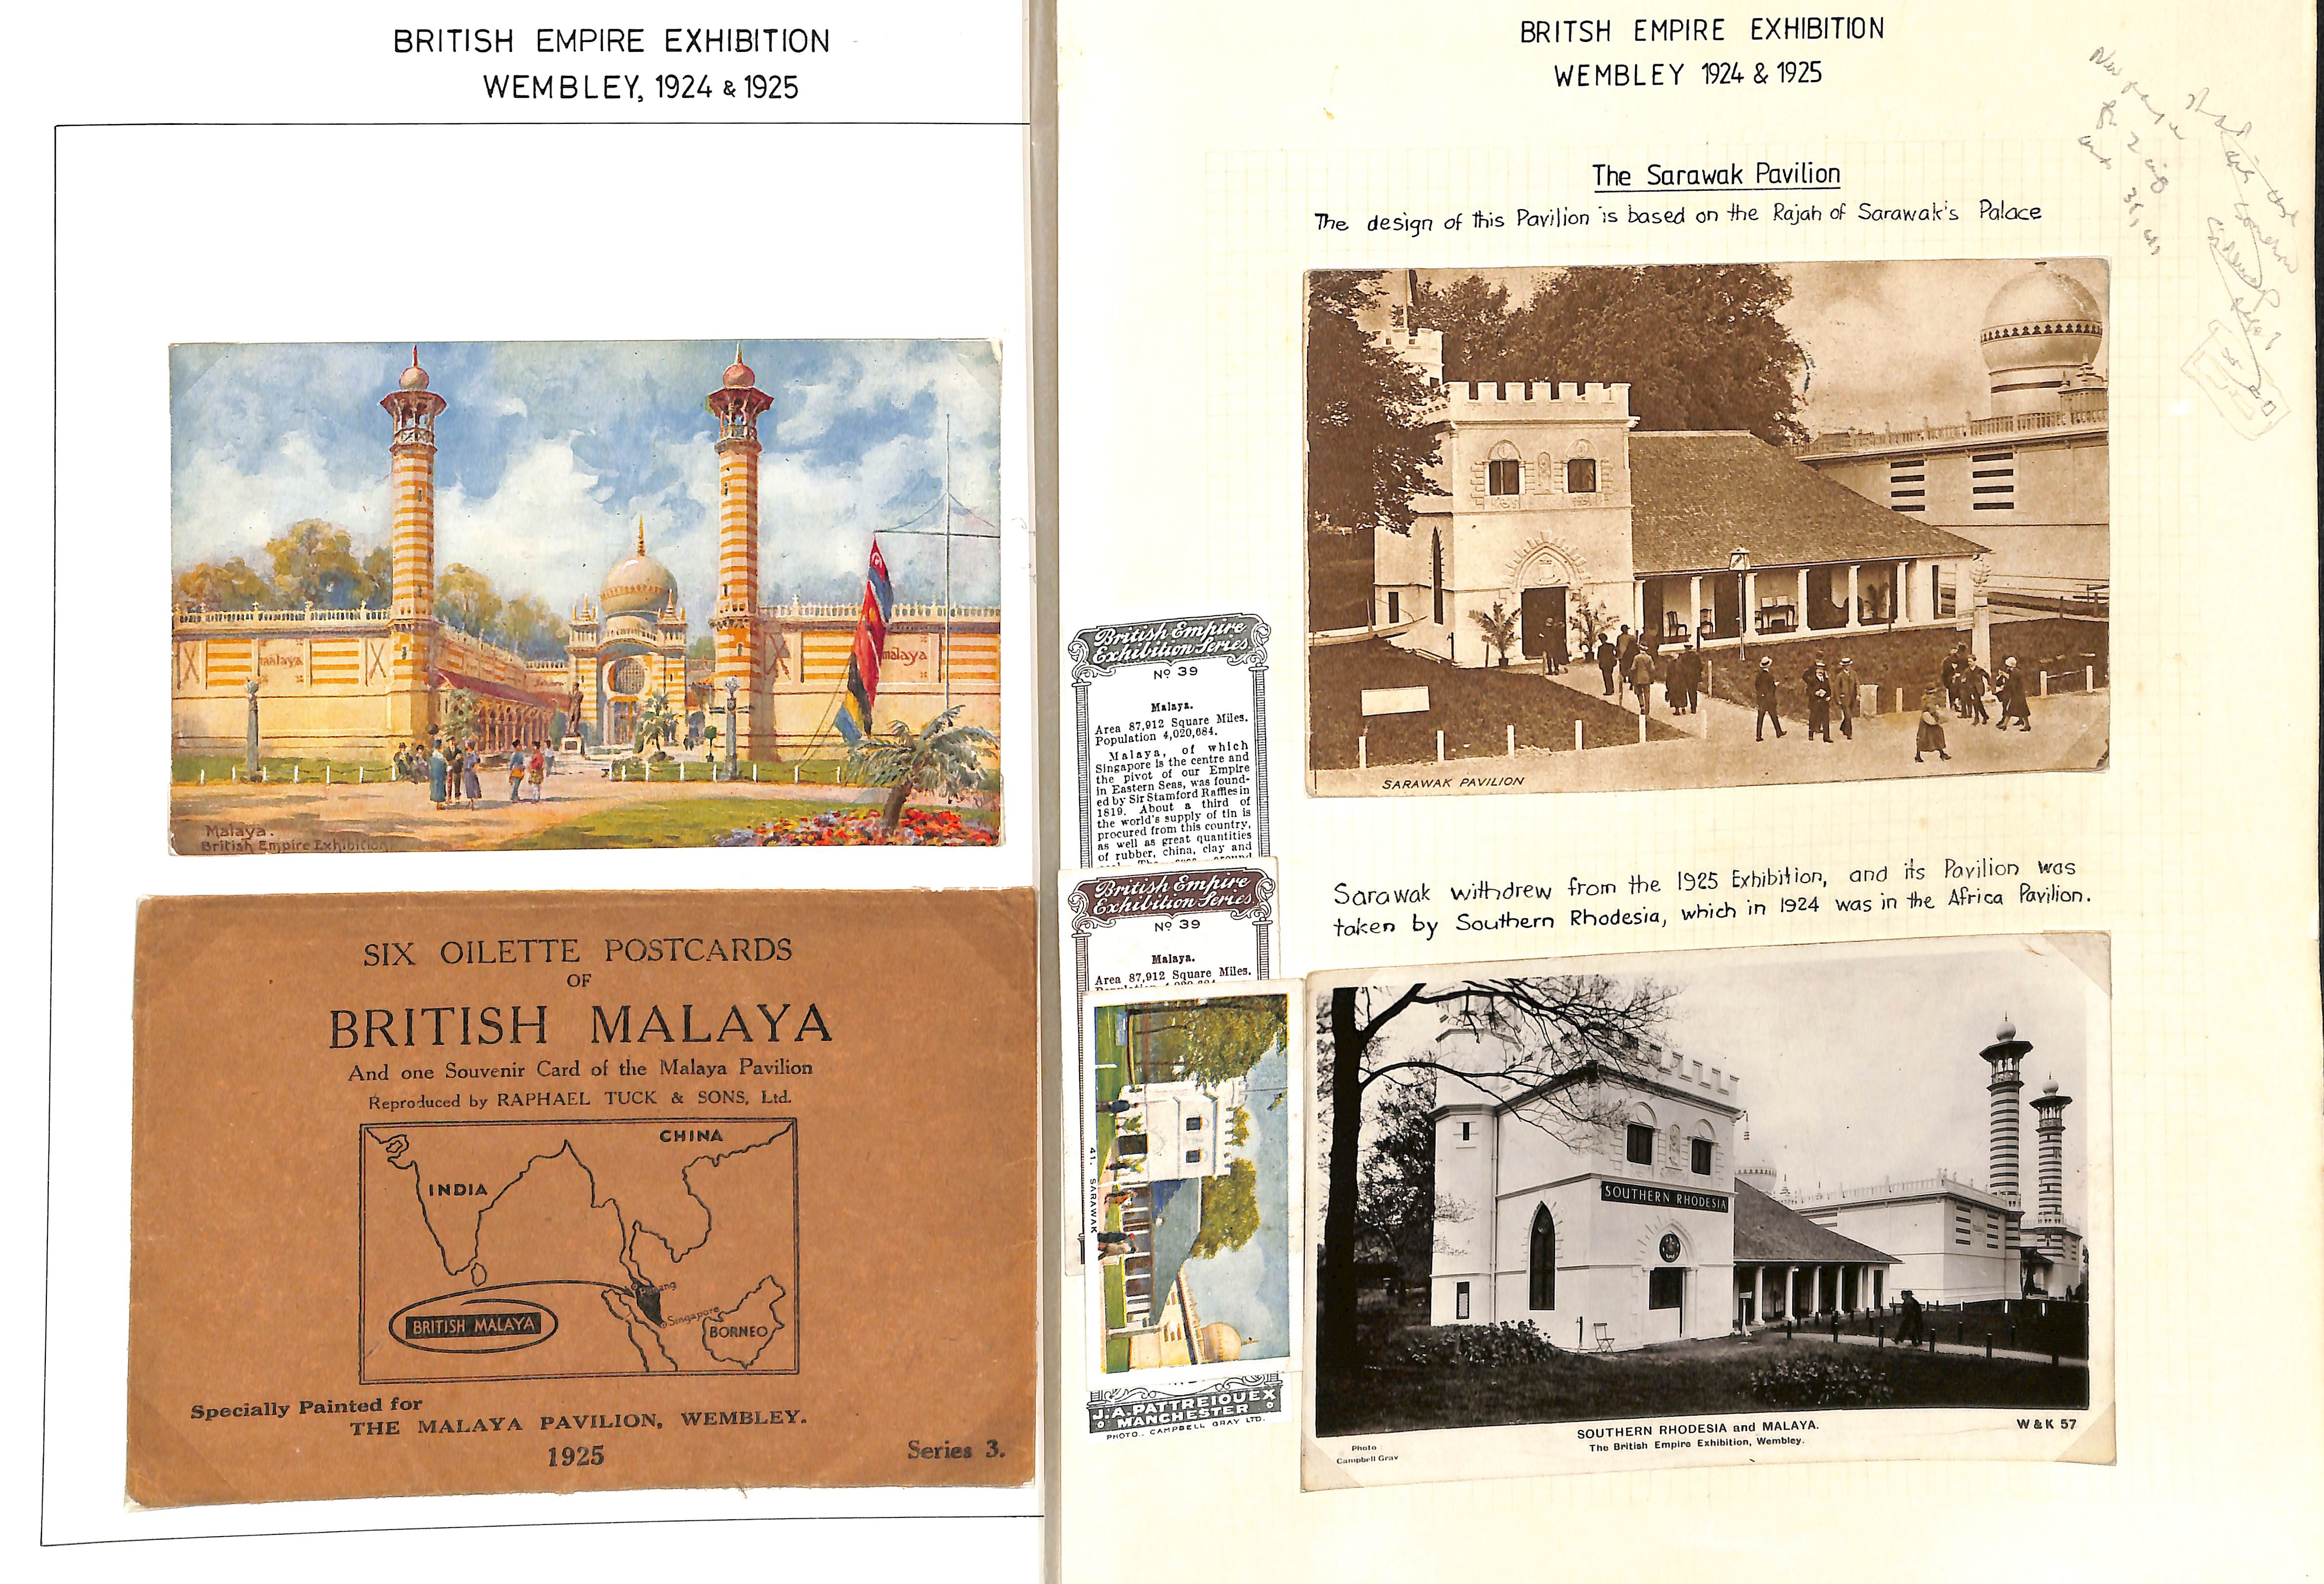 1923 Postcard and a front from Kula Lumpur, franked F.M.S 6c, both with circular "BRITISH EMPIRE / - Image 4 of 6